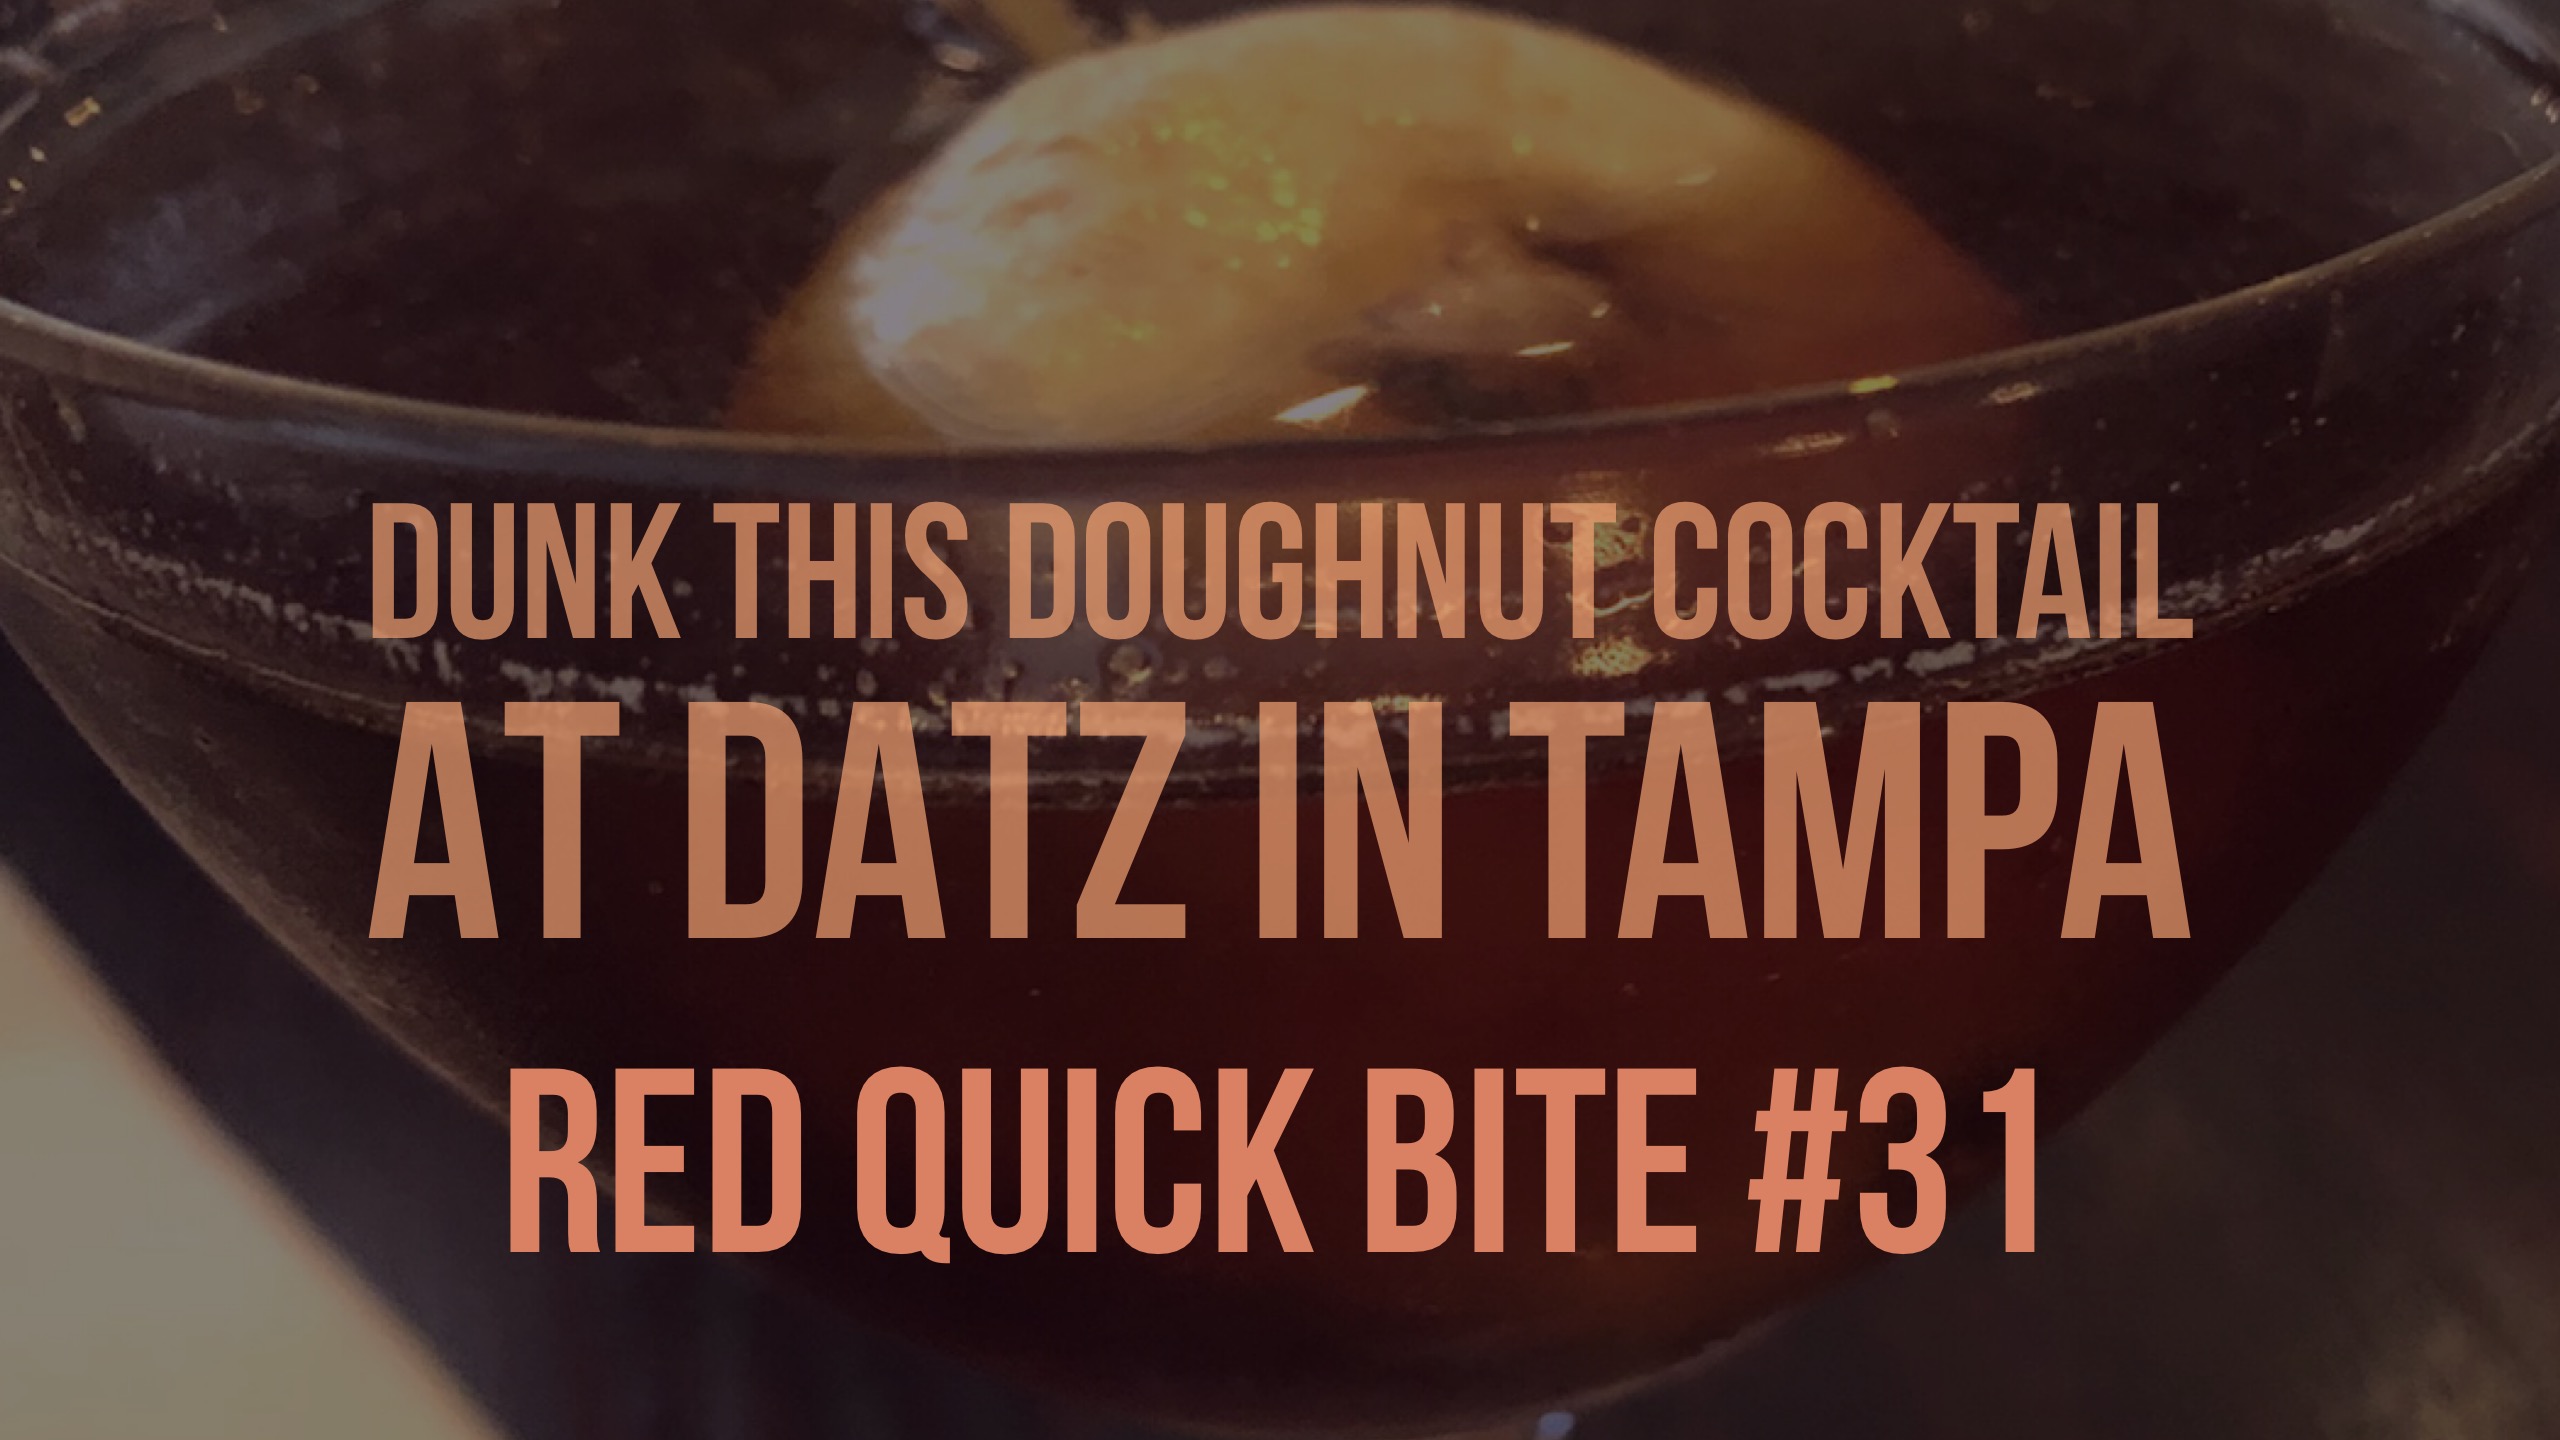 RED Quick Bite #31:  Dunk This Doughnut Cocktail at Datz in Tampa